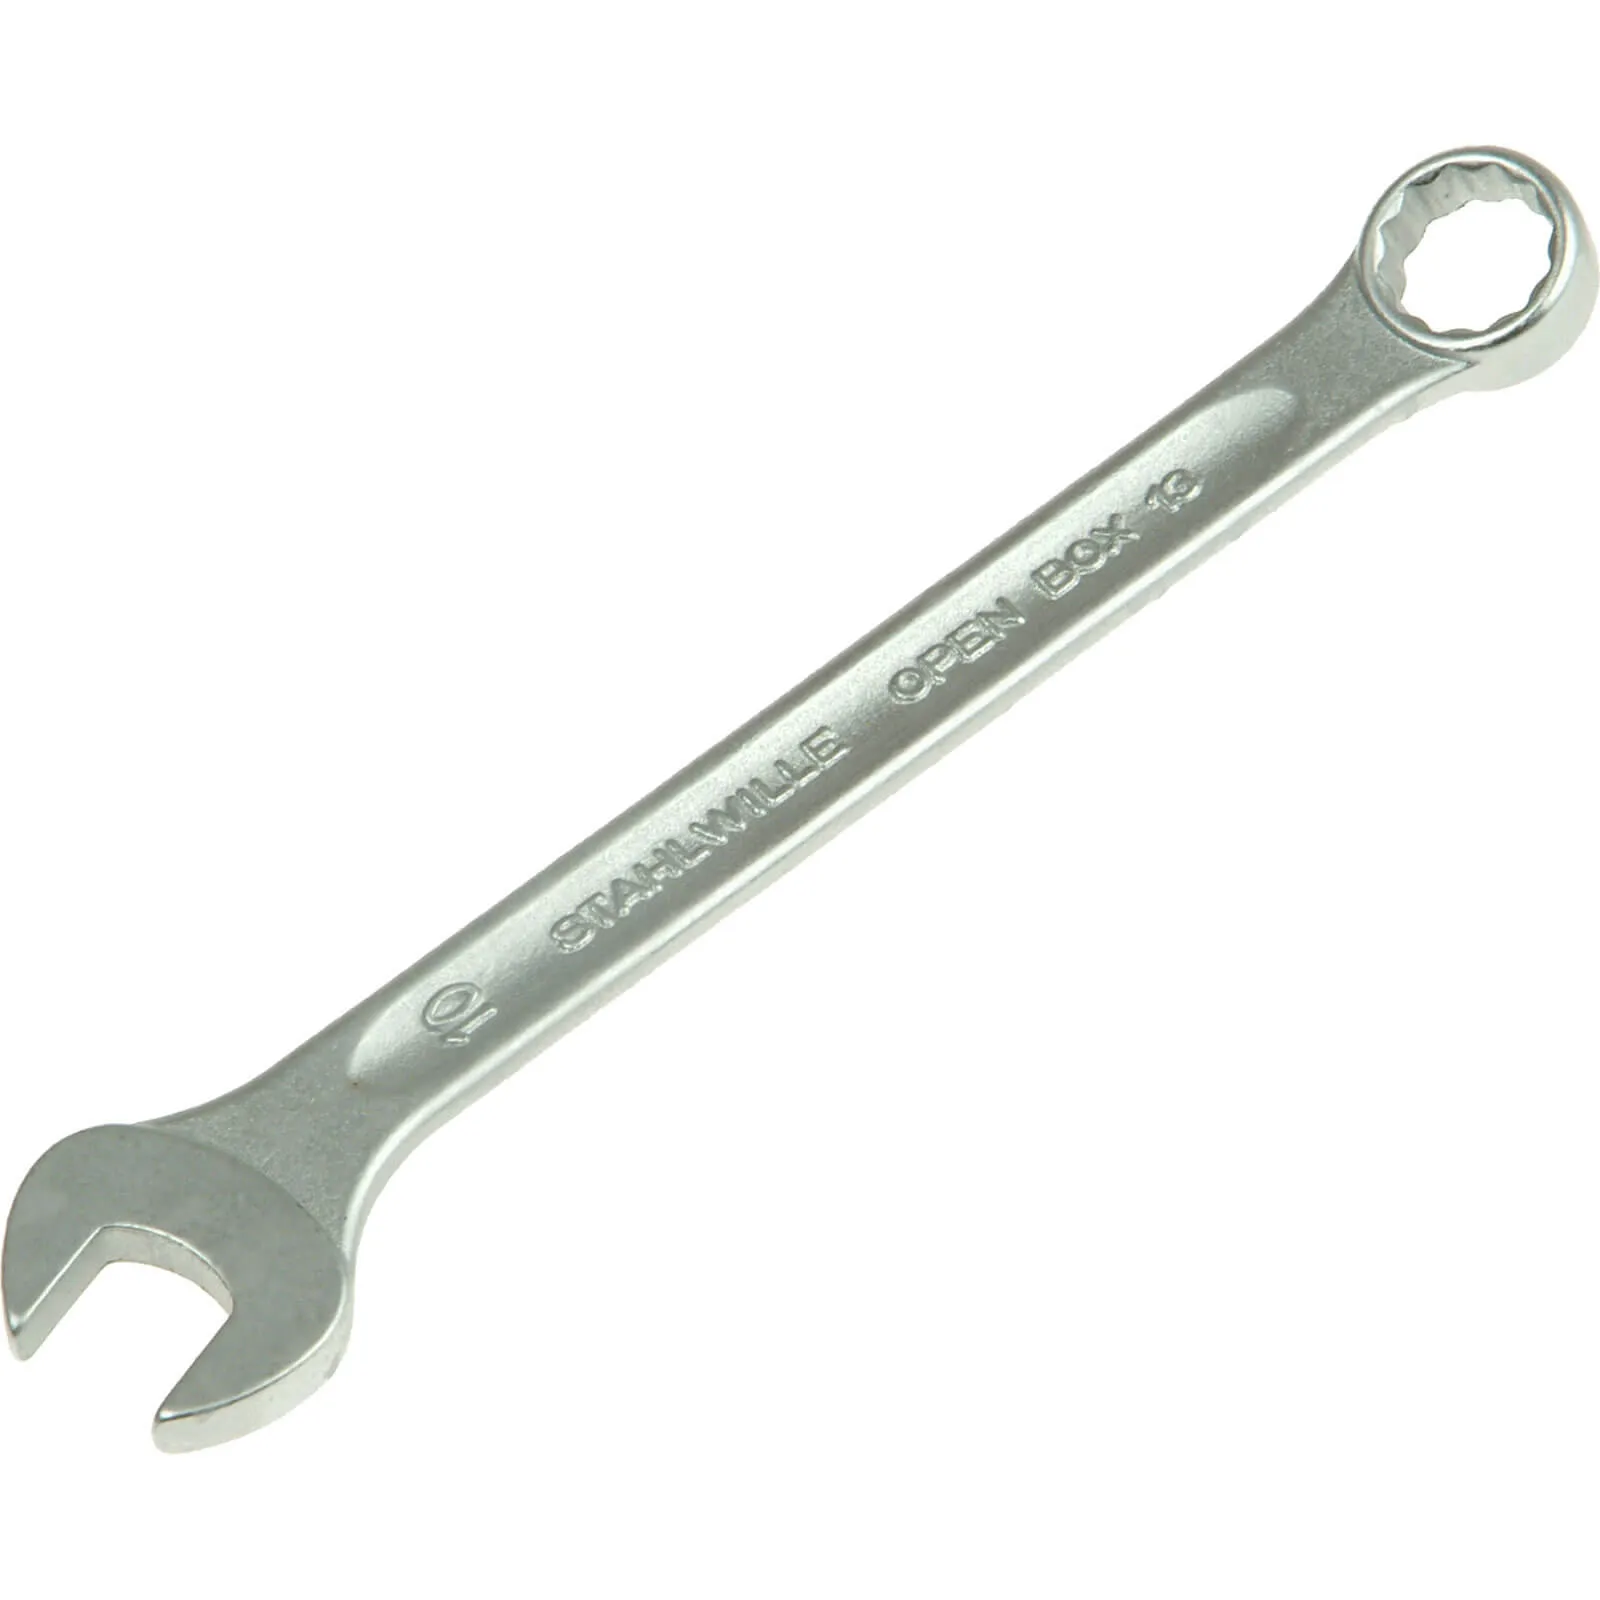 Stahlwille 13 Series Combination Spanner Metric - 18mm